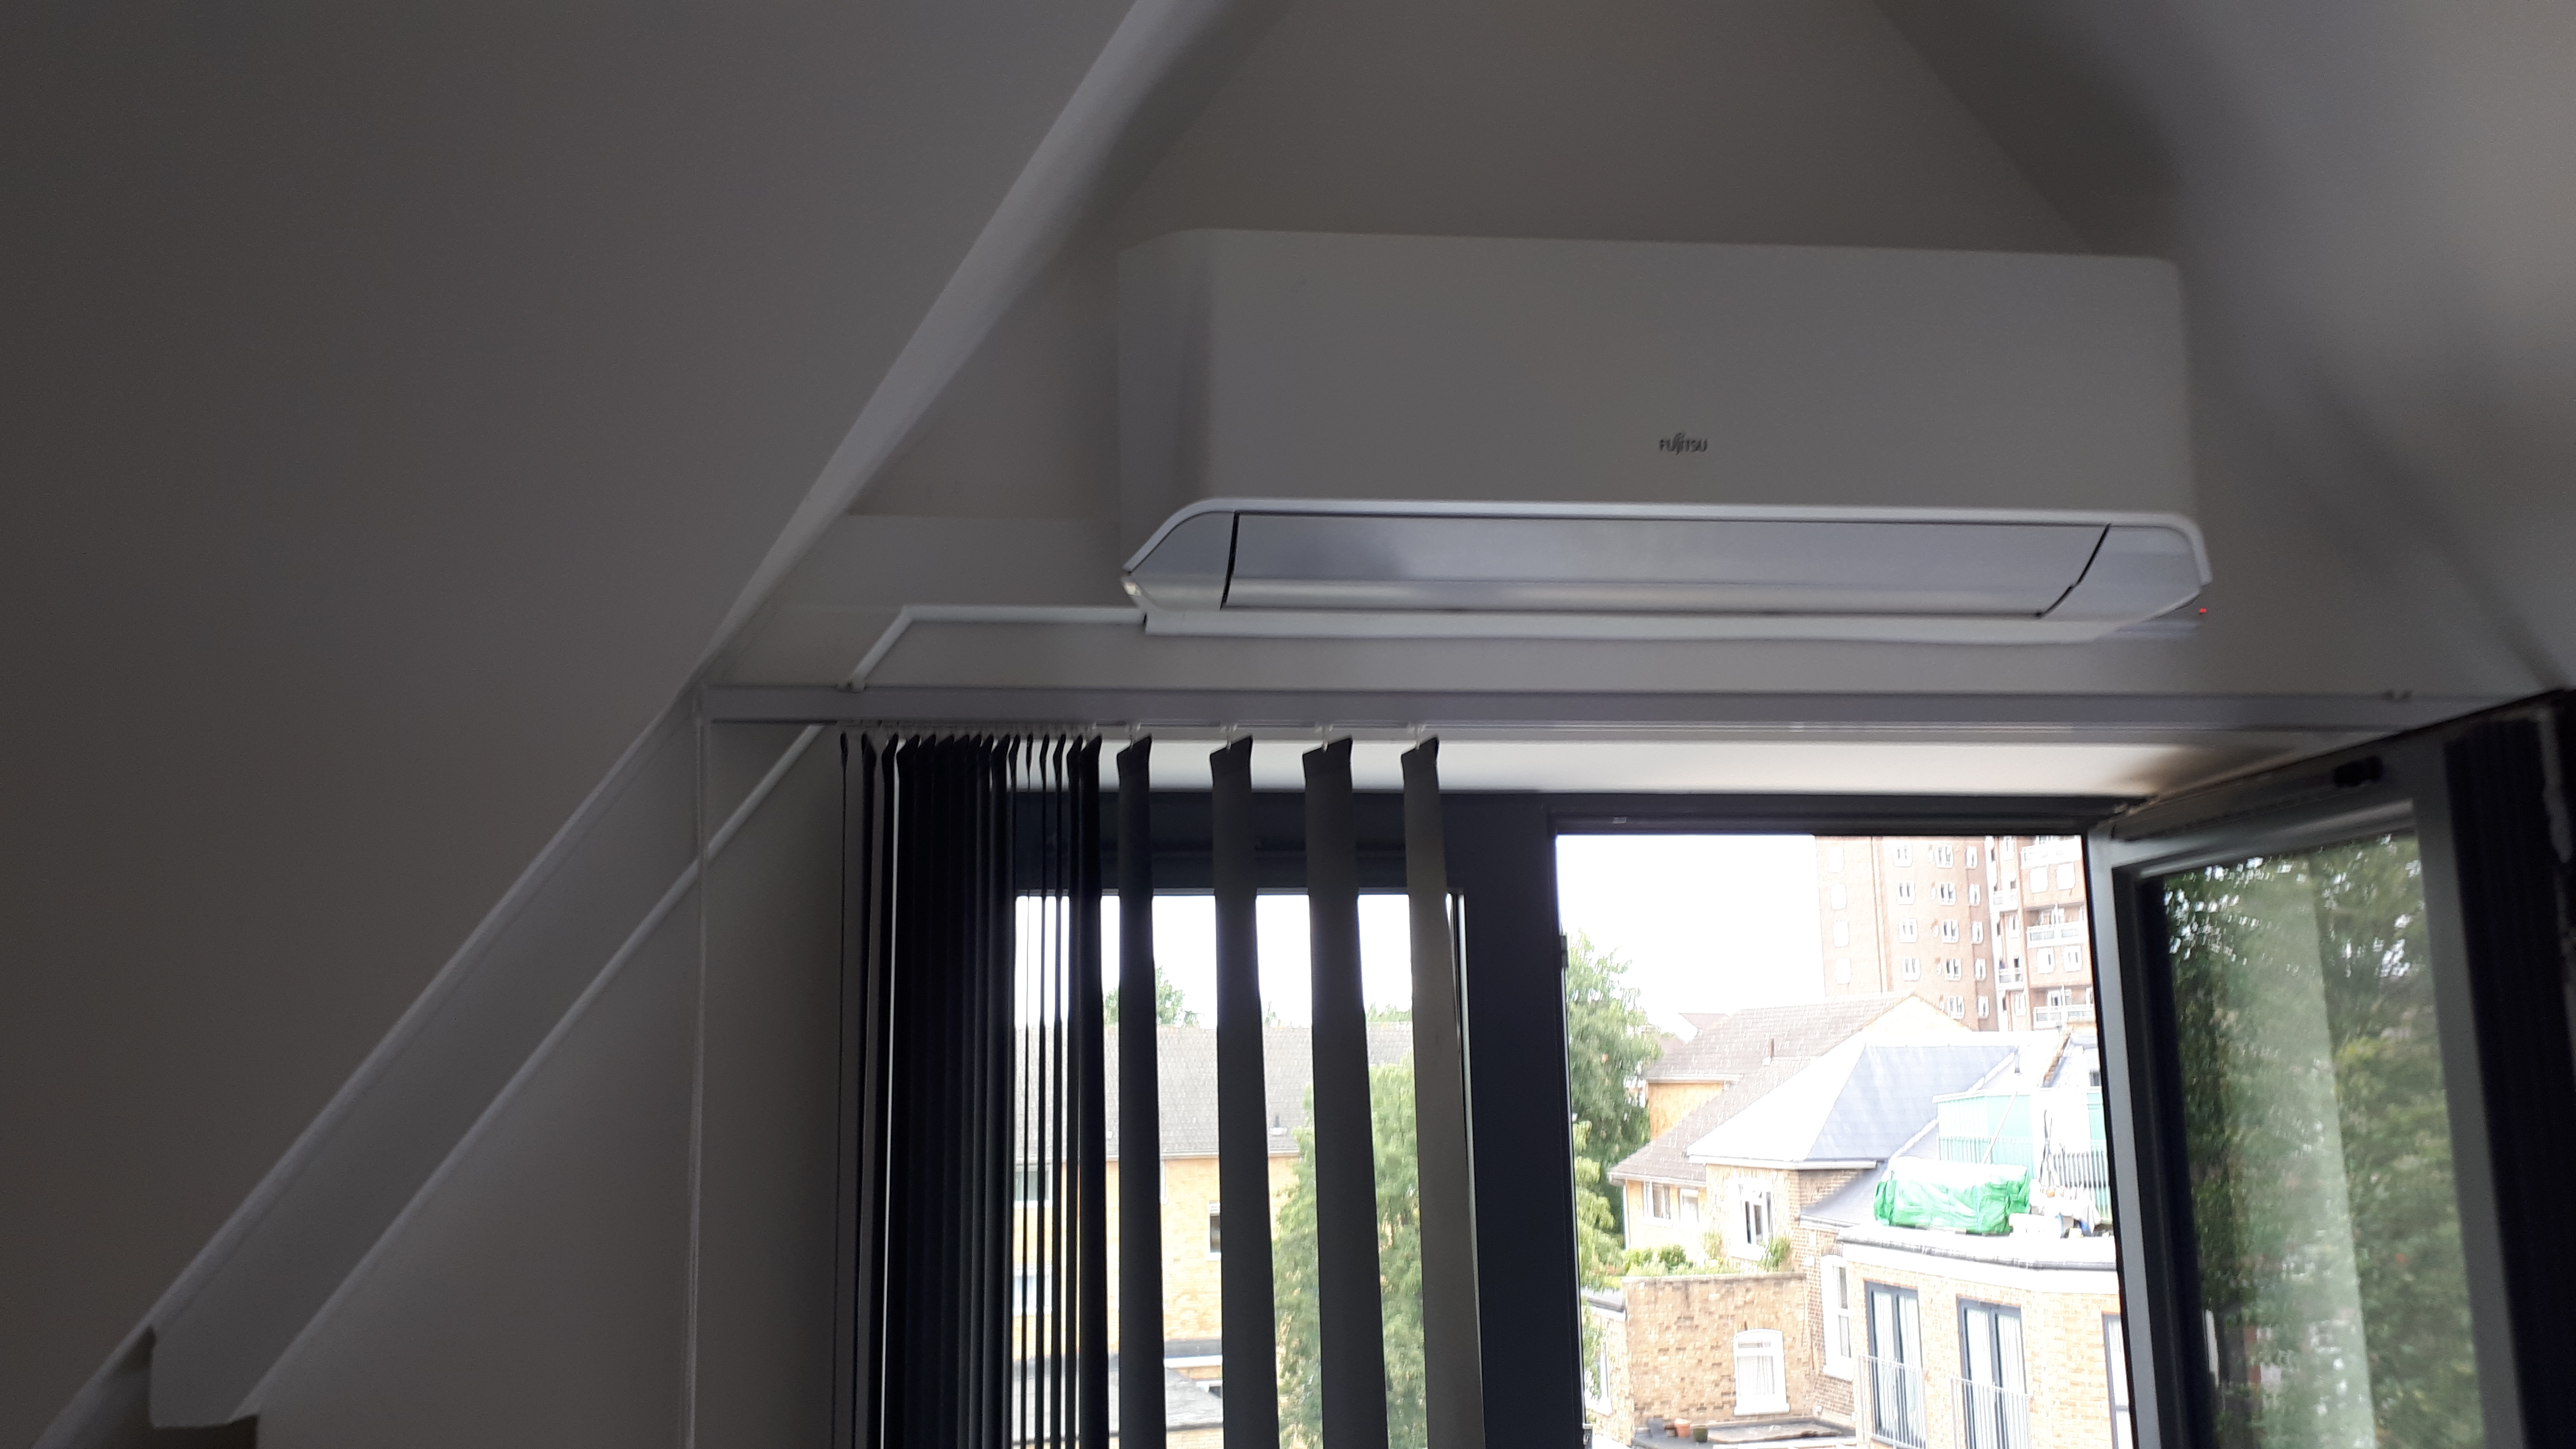 BEDROOM AIR CONDITIONING